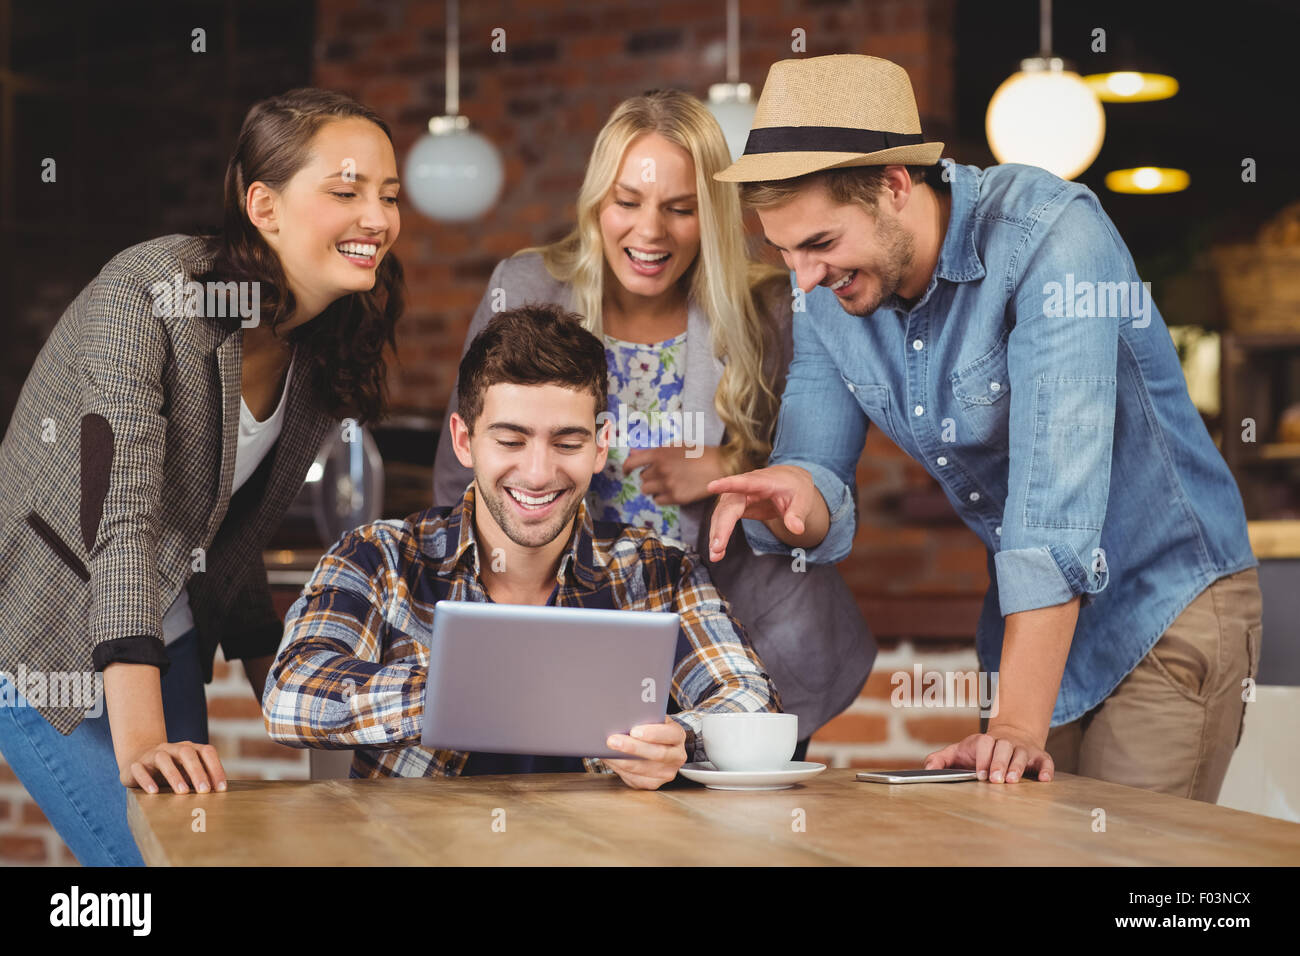 Laughing friends looking at tablet computer Stock Photo